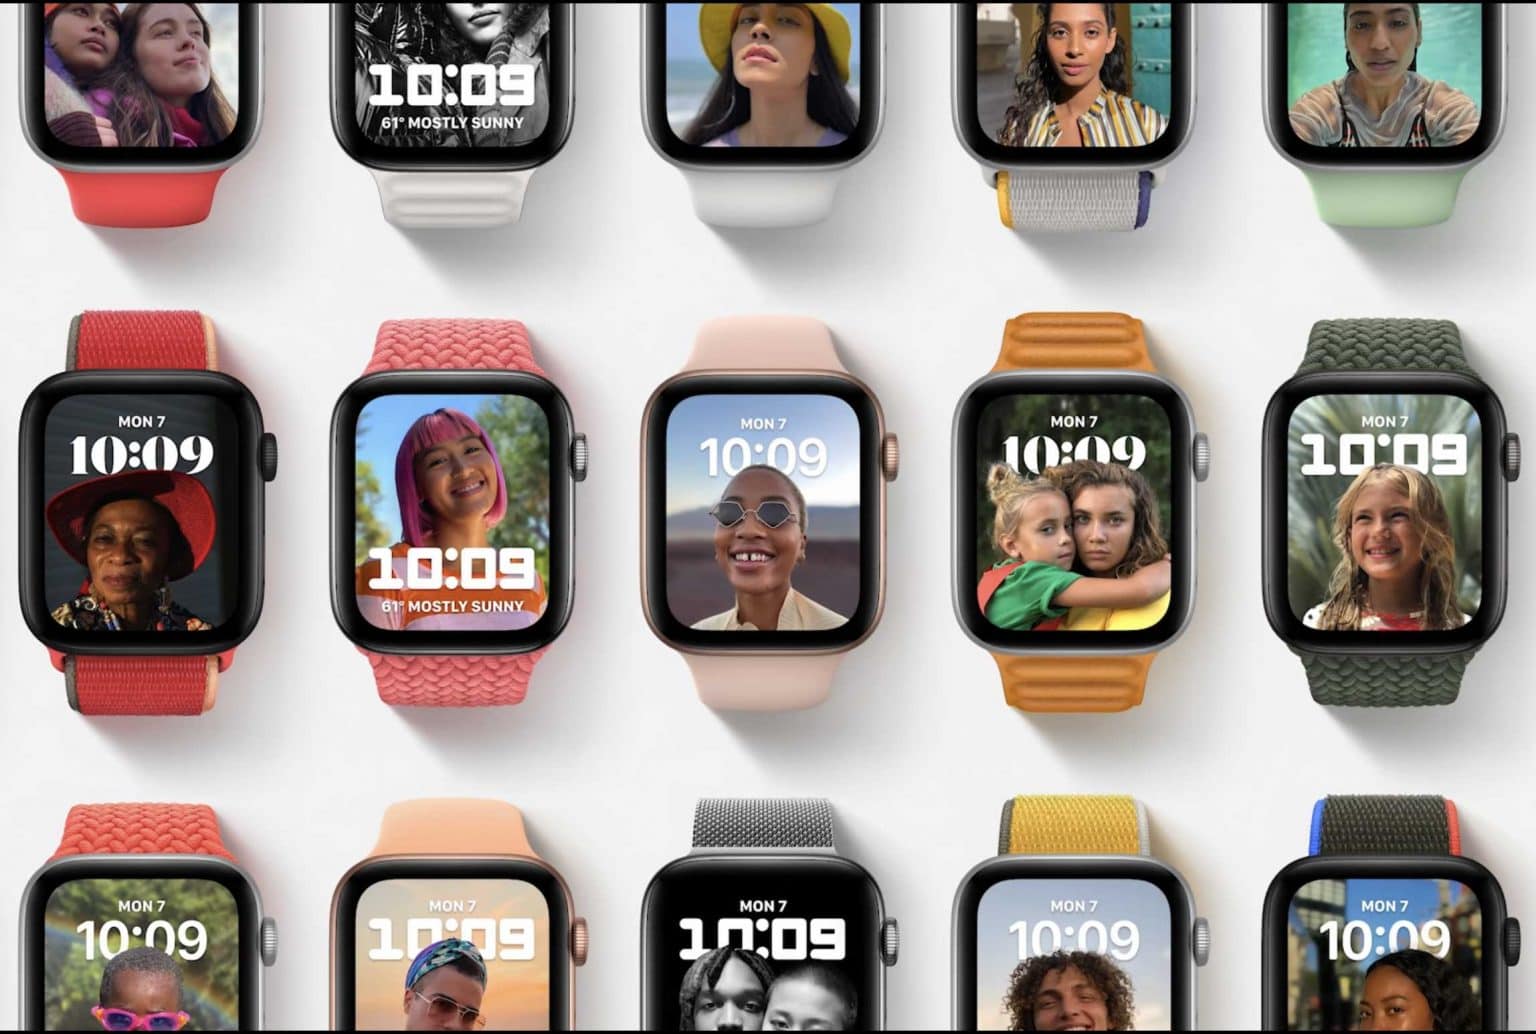 watchOS introduces a new Portrait mode watch face with depth effect